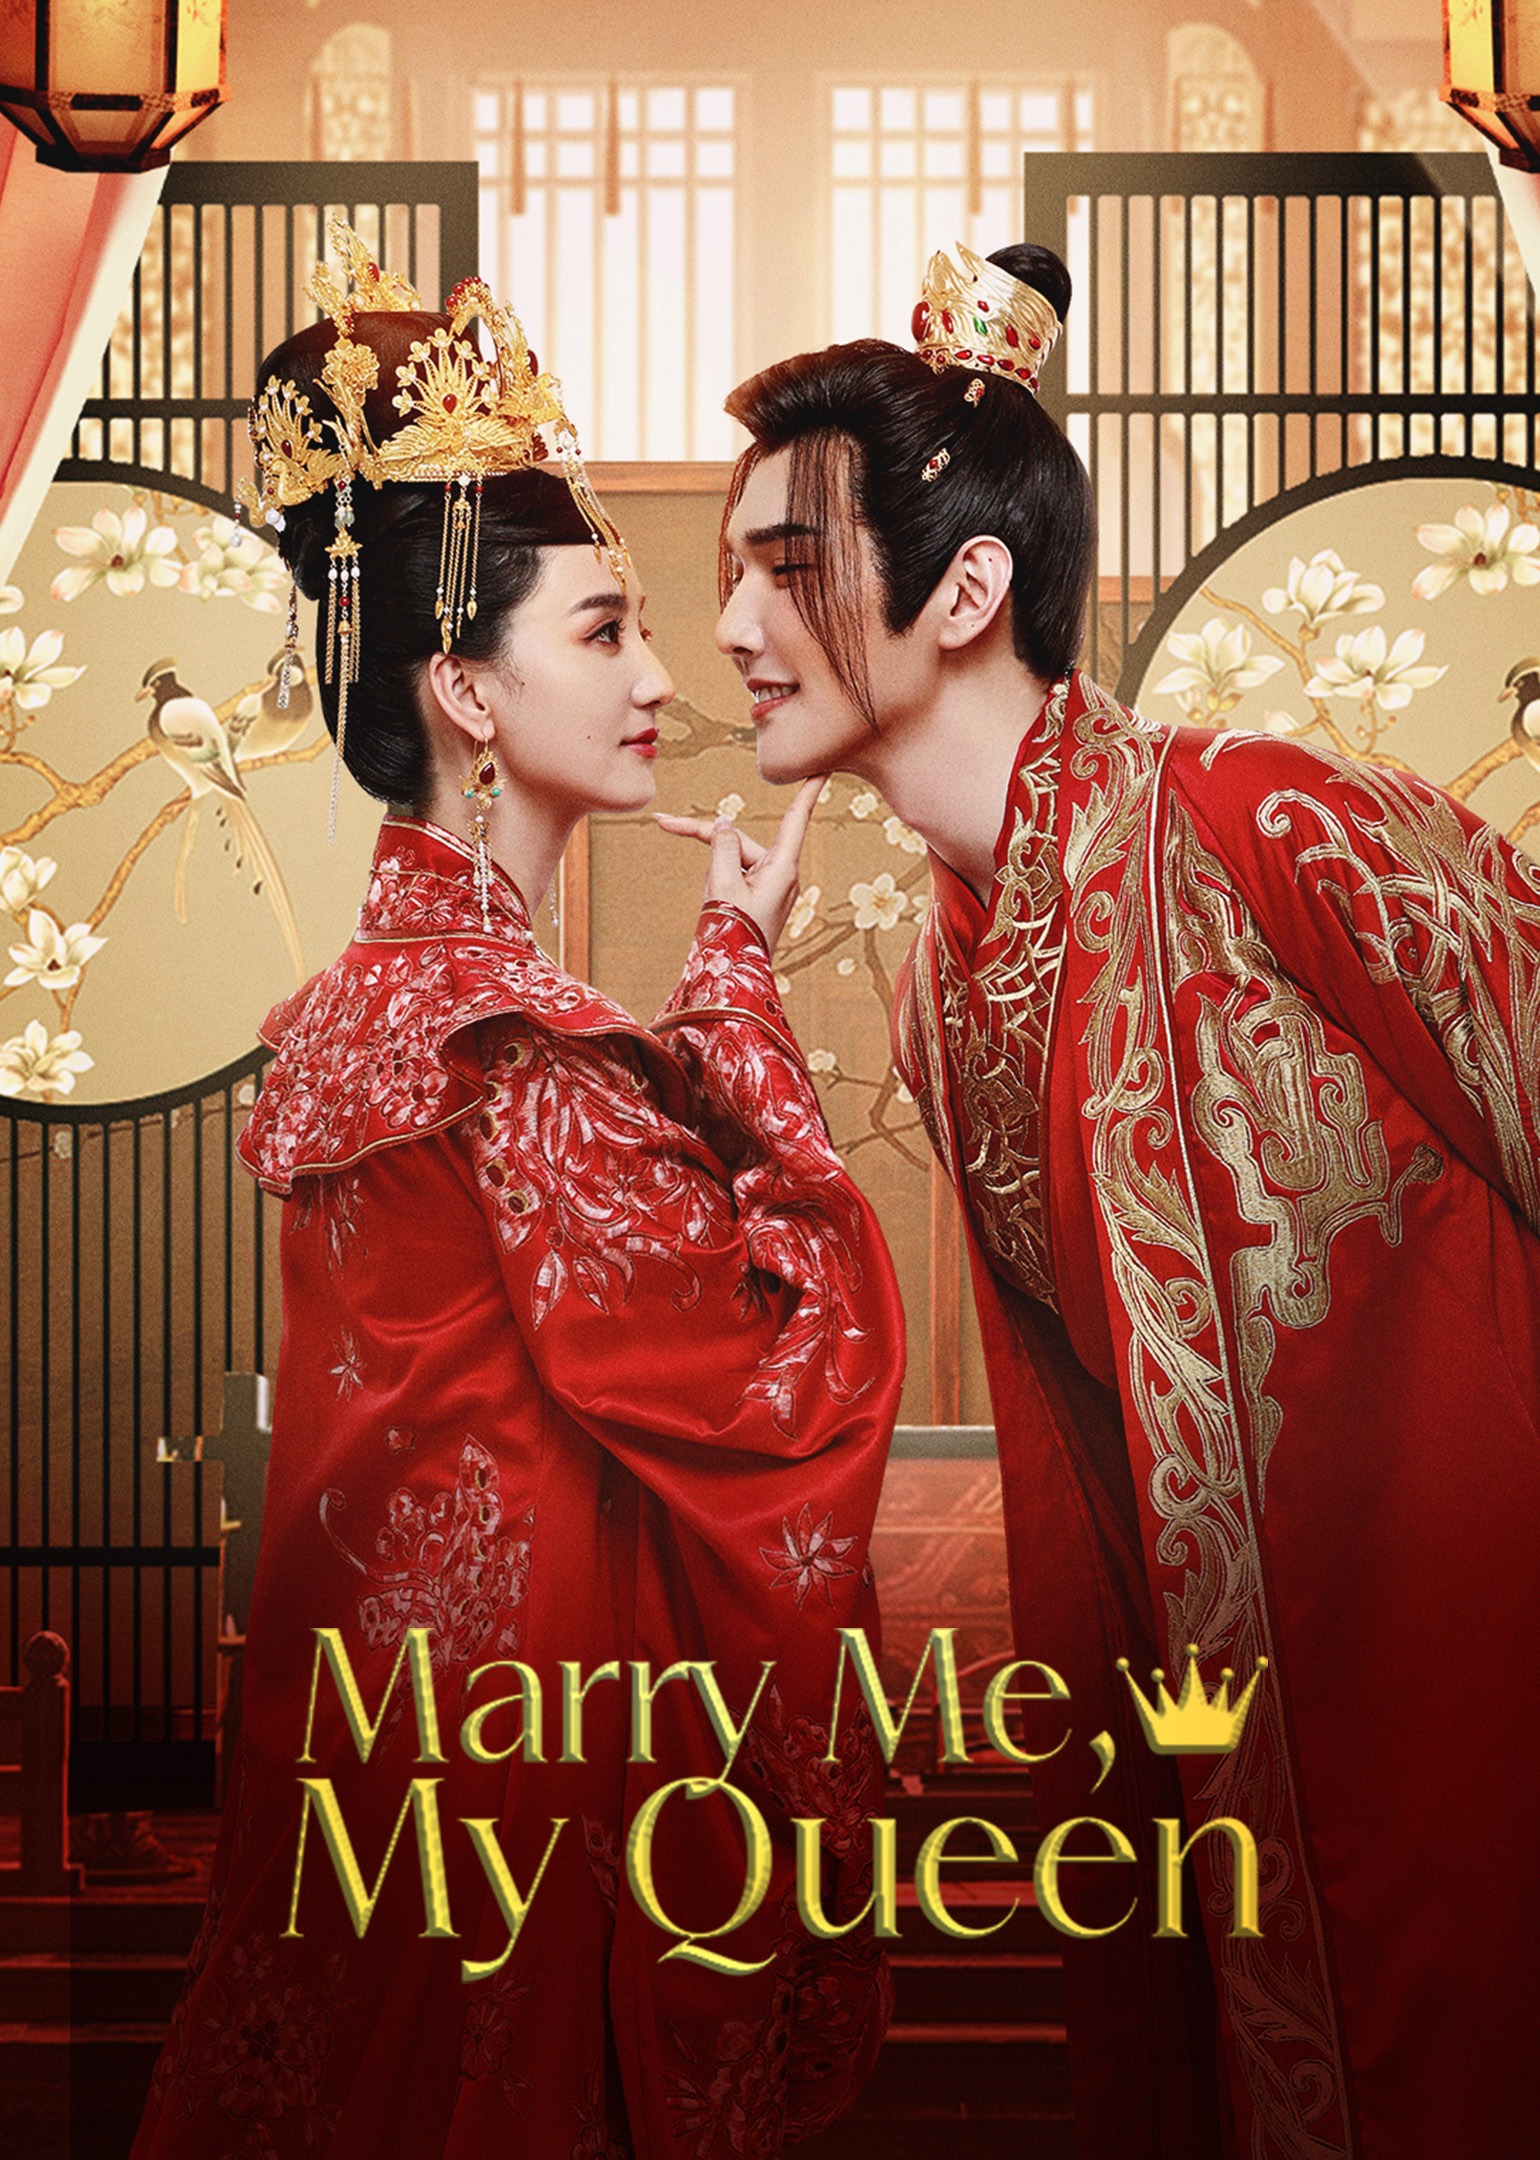 ana goodman recommends Marry Queen Marry Me